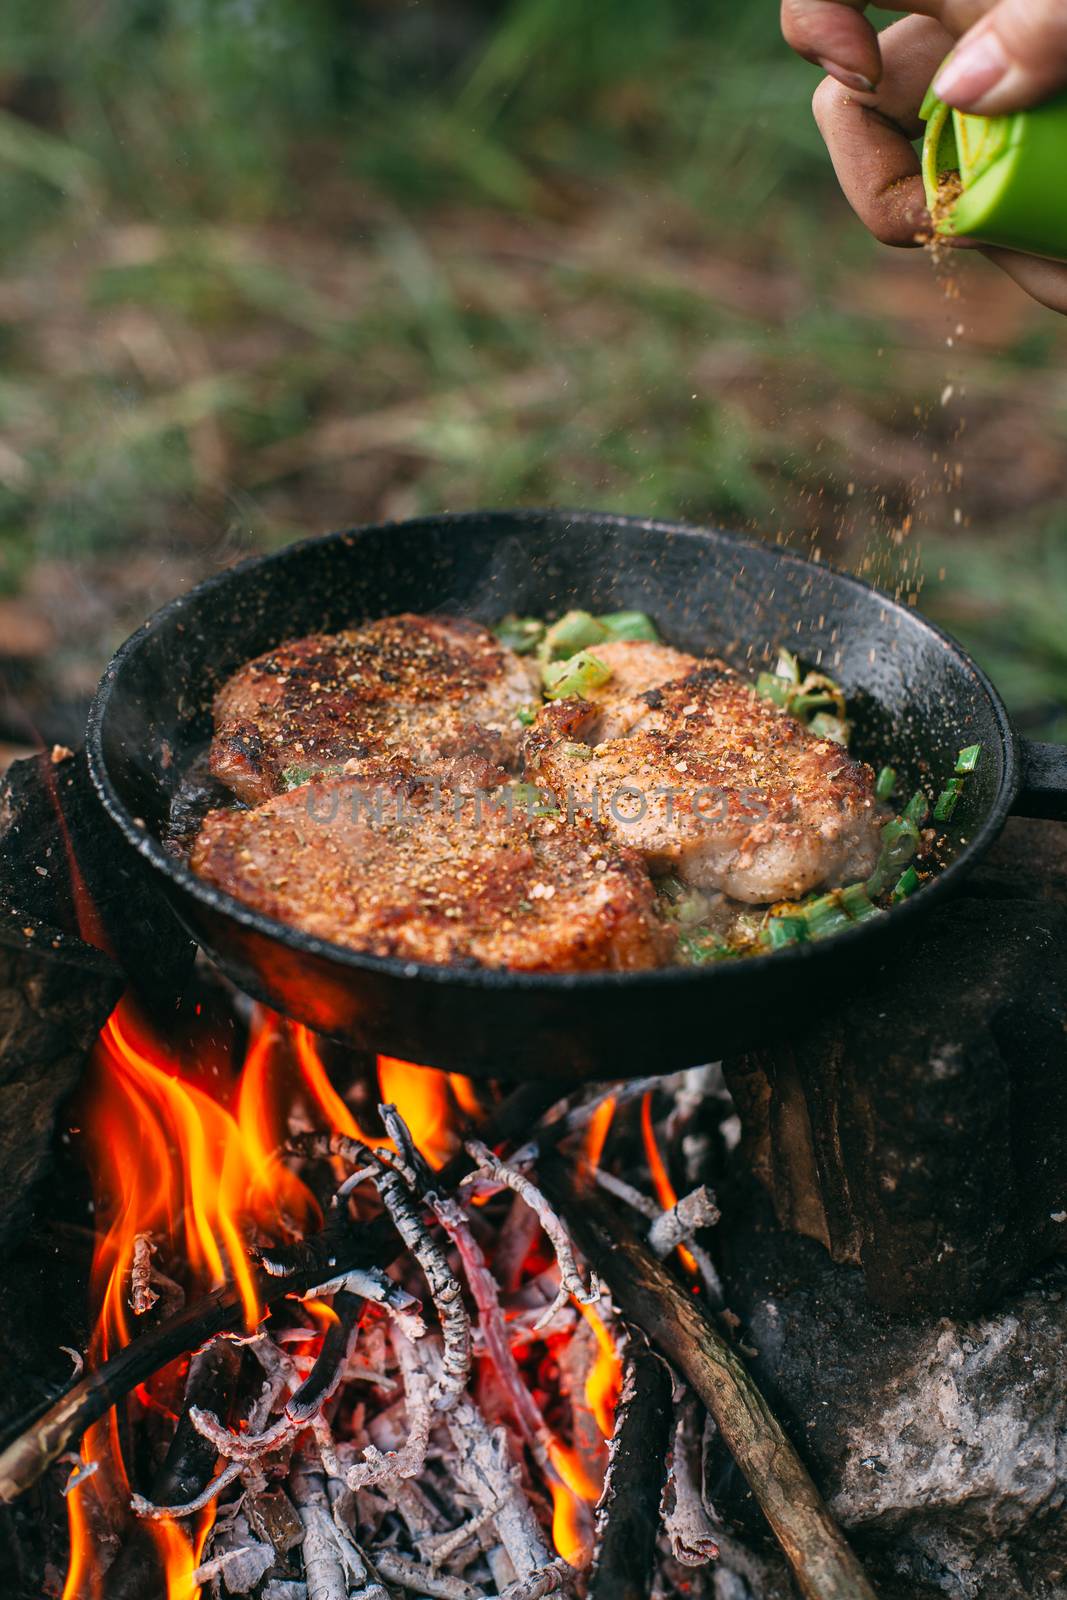 Frying meat in a pan over an open fire with leek. Steak in a pan on a fire. Cooking in nature. Picnic. Grill on fire. Hand adding seasoning.